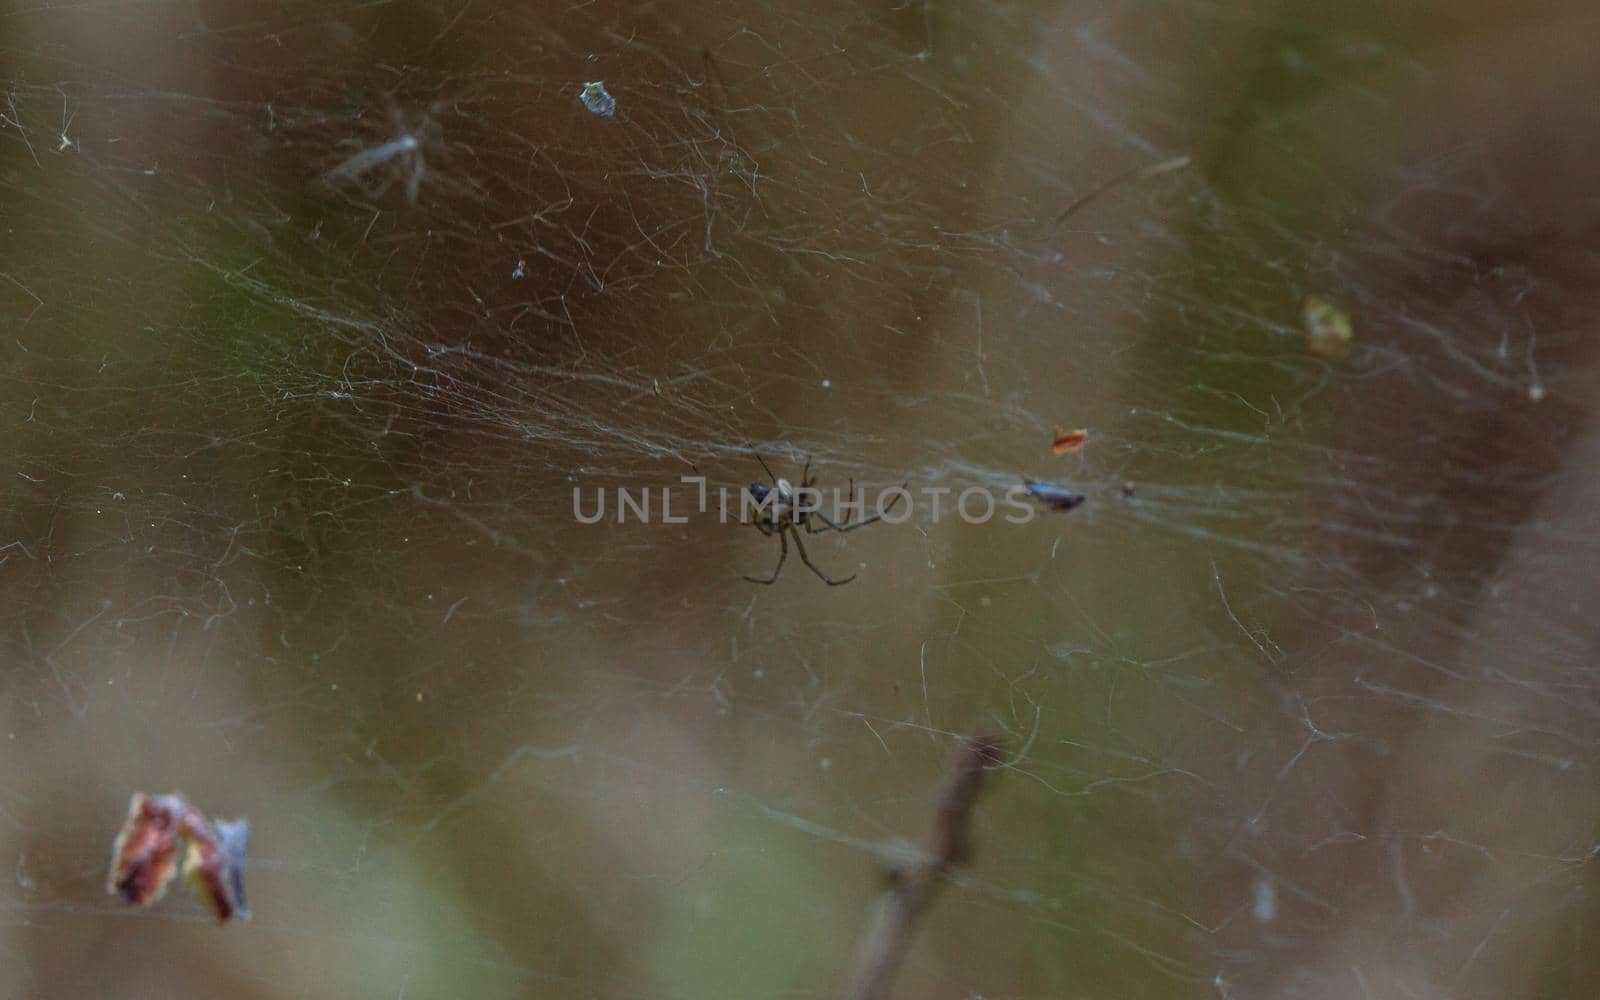 Spider made thread, transparent cobweb for insect food